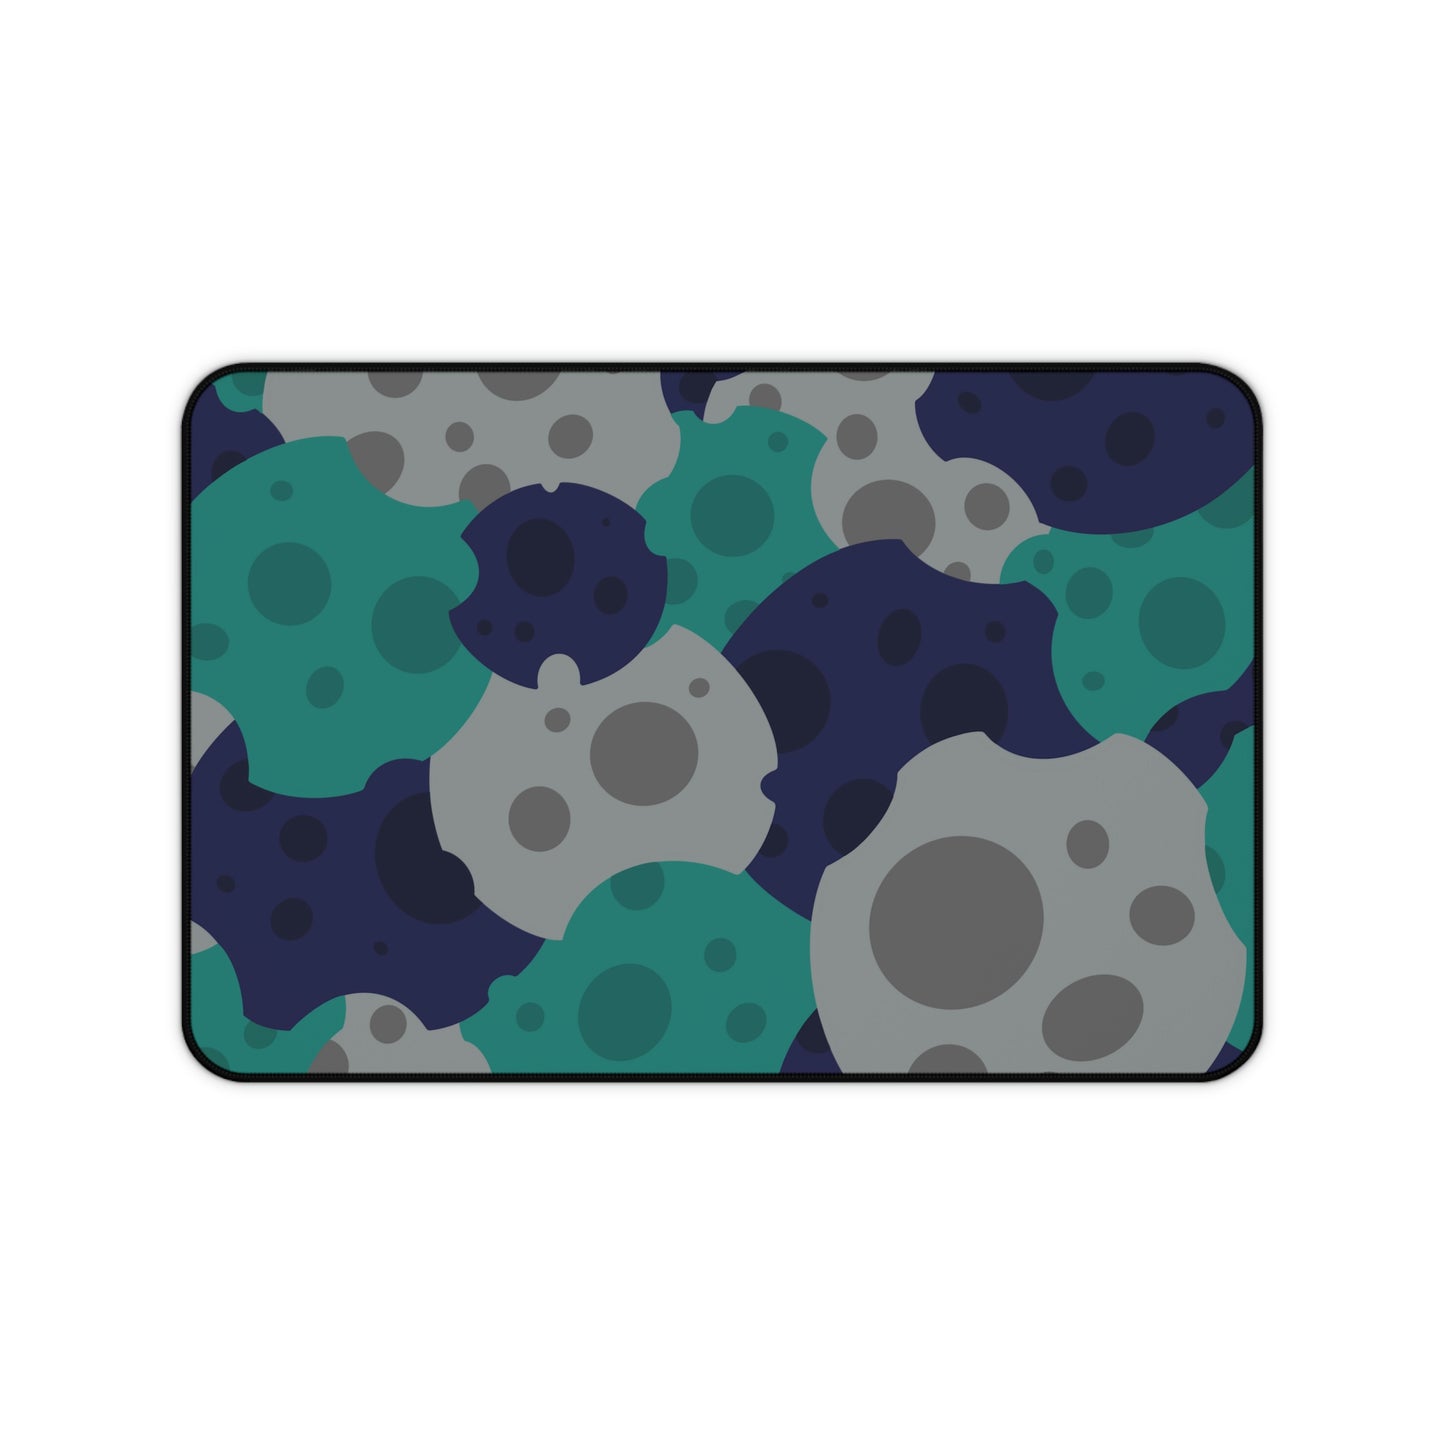 A 12" x 18" desk mat with gray, teal, and dark blue meteorites.